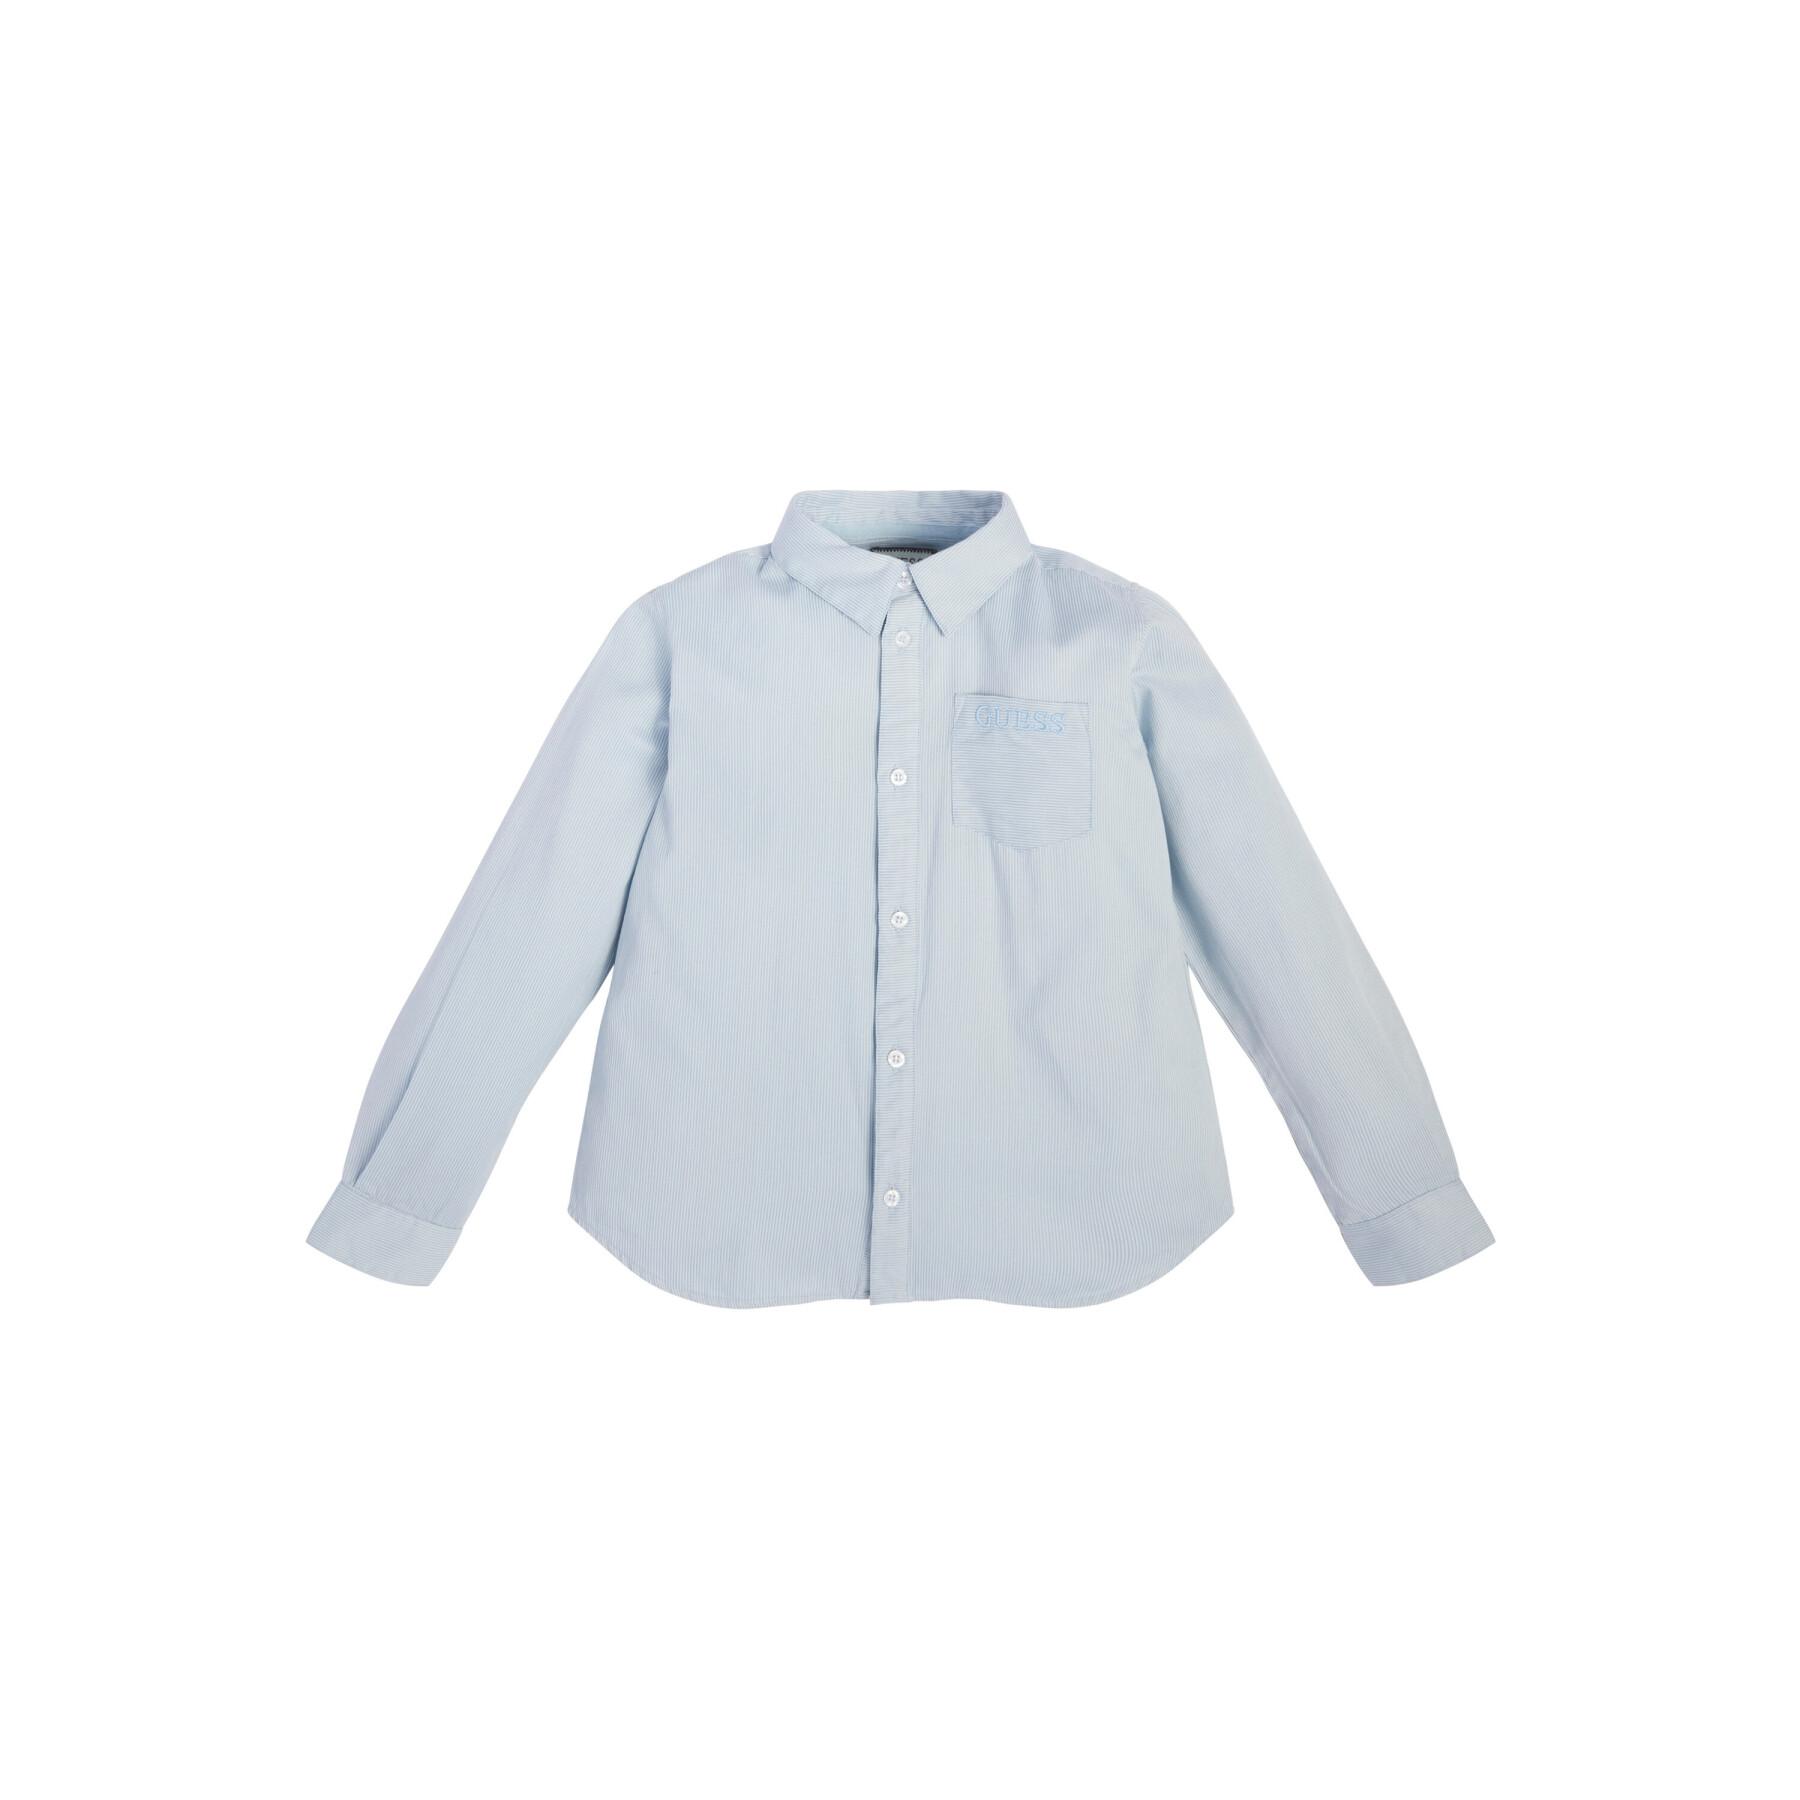 Adjustable cotton shirt for kids Guess